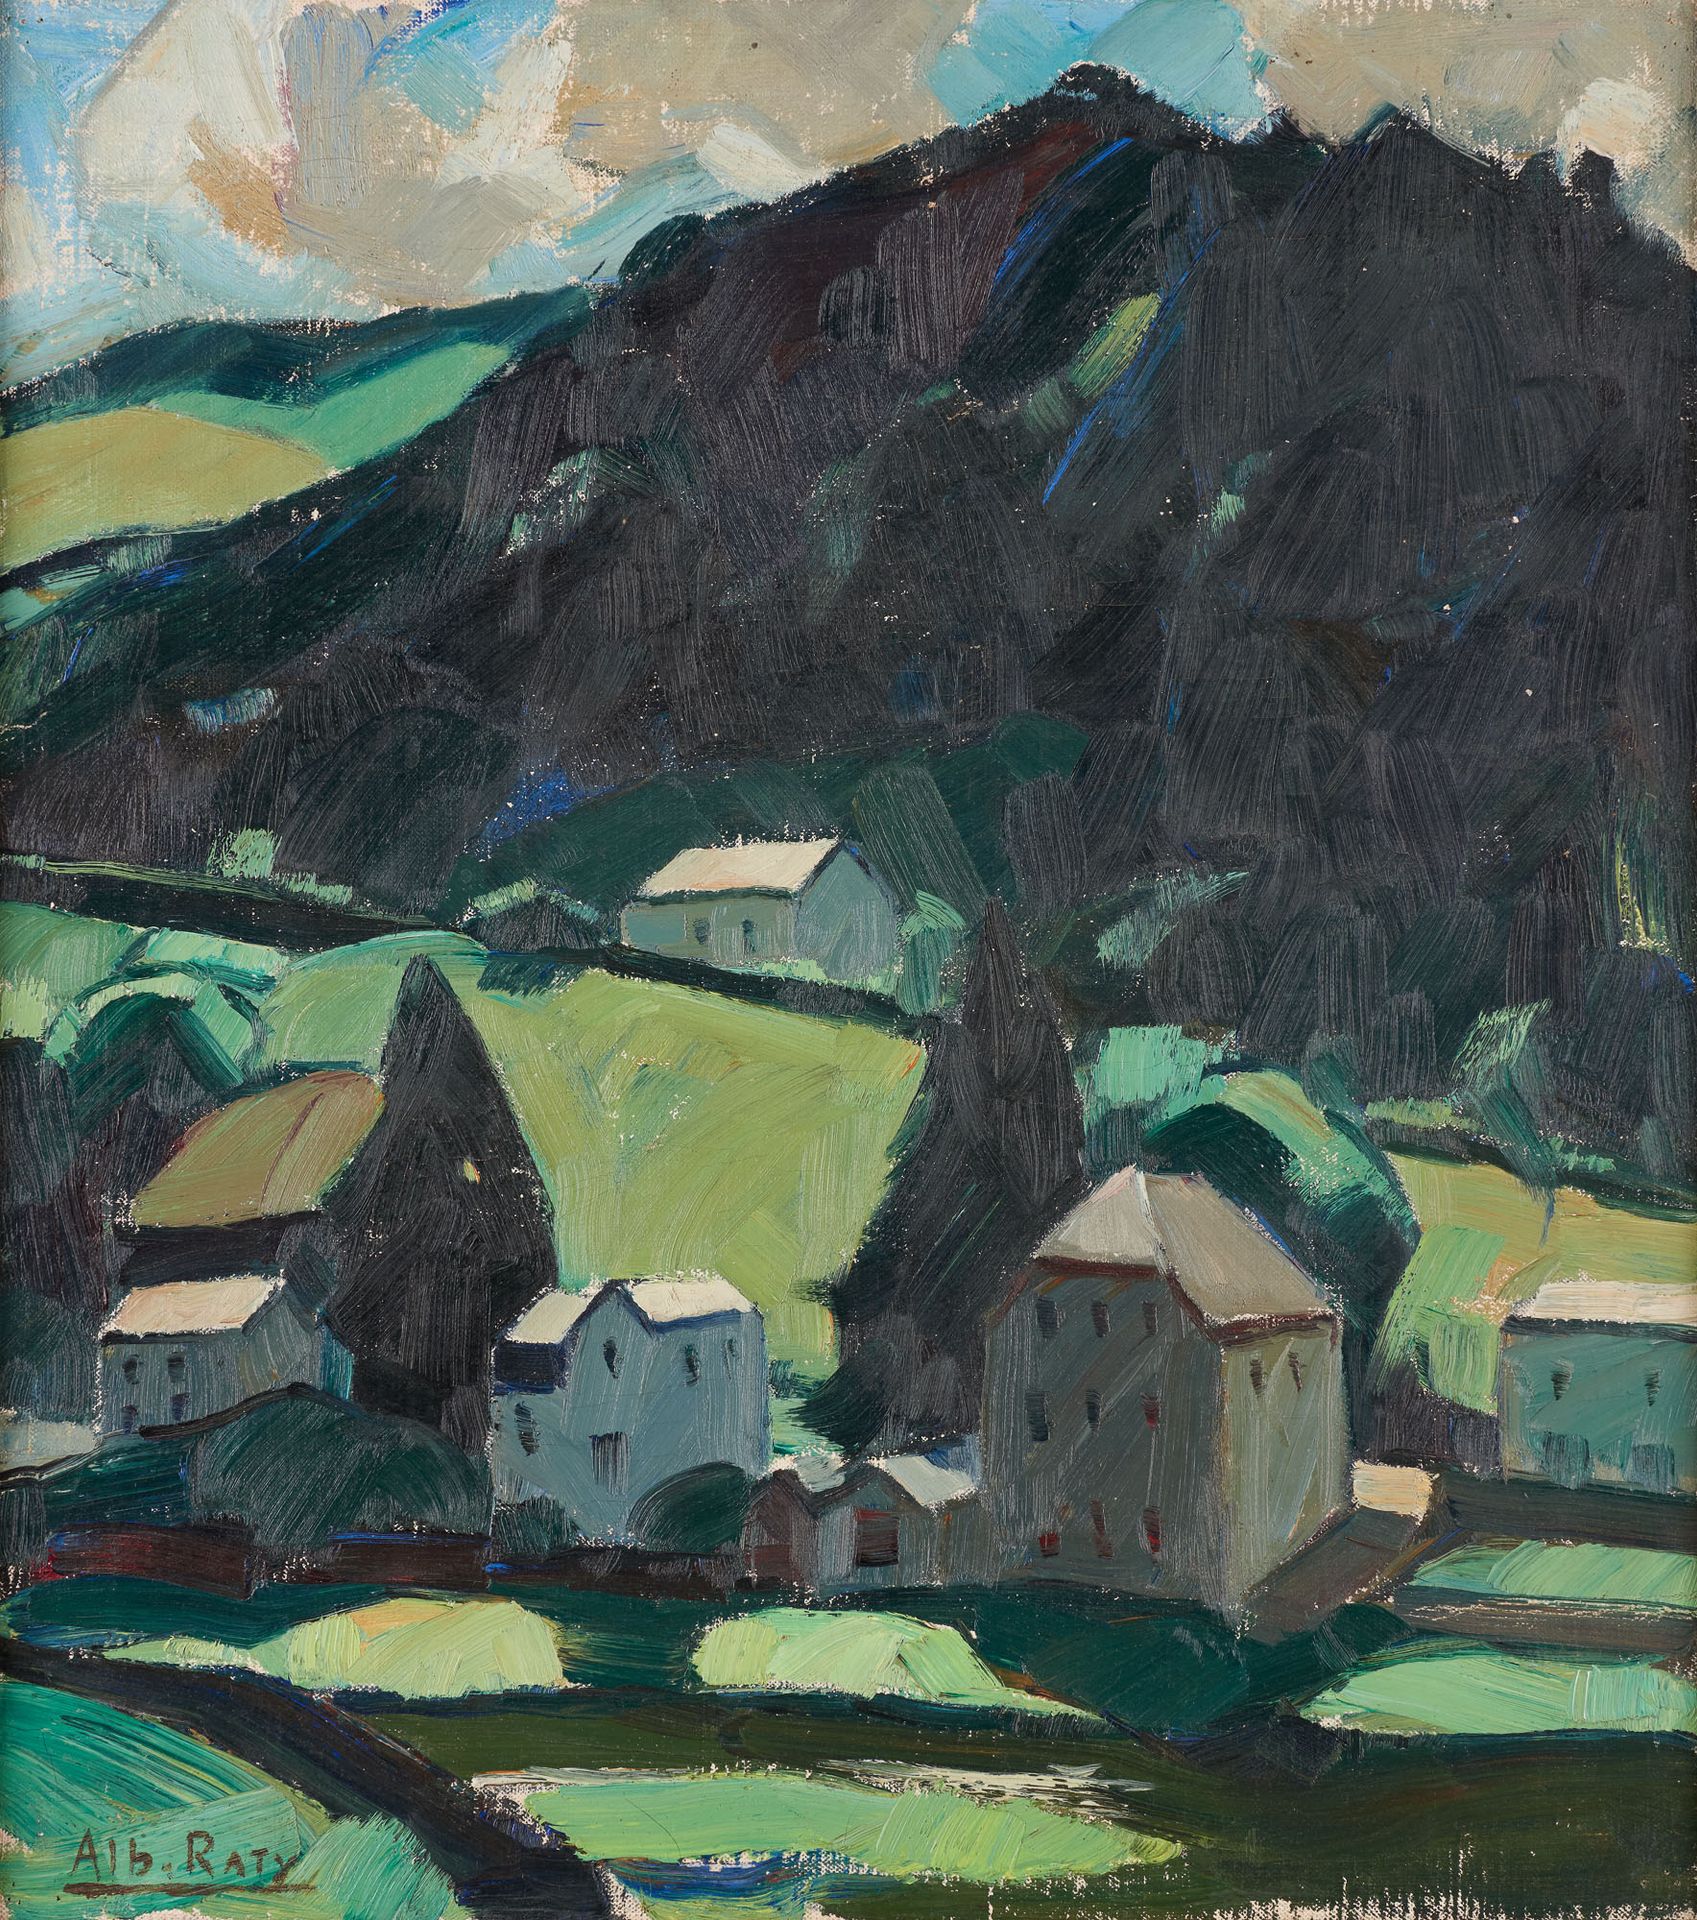 Albert RATY École belge (1889-1970) Oil on canvas: Plunging view on Bouillon.

S&hellip;